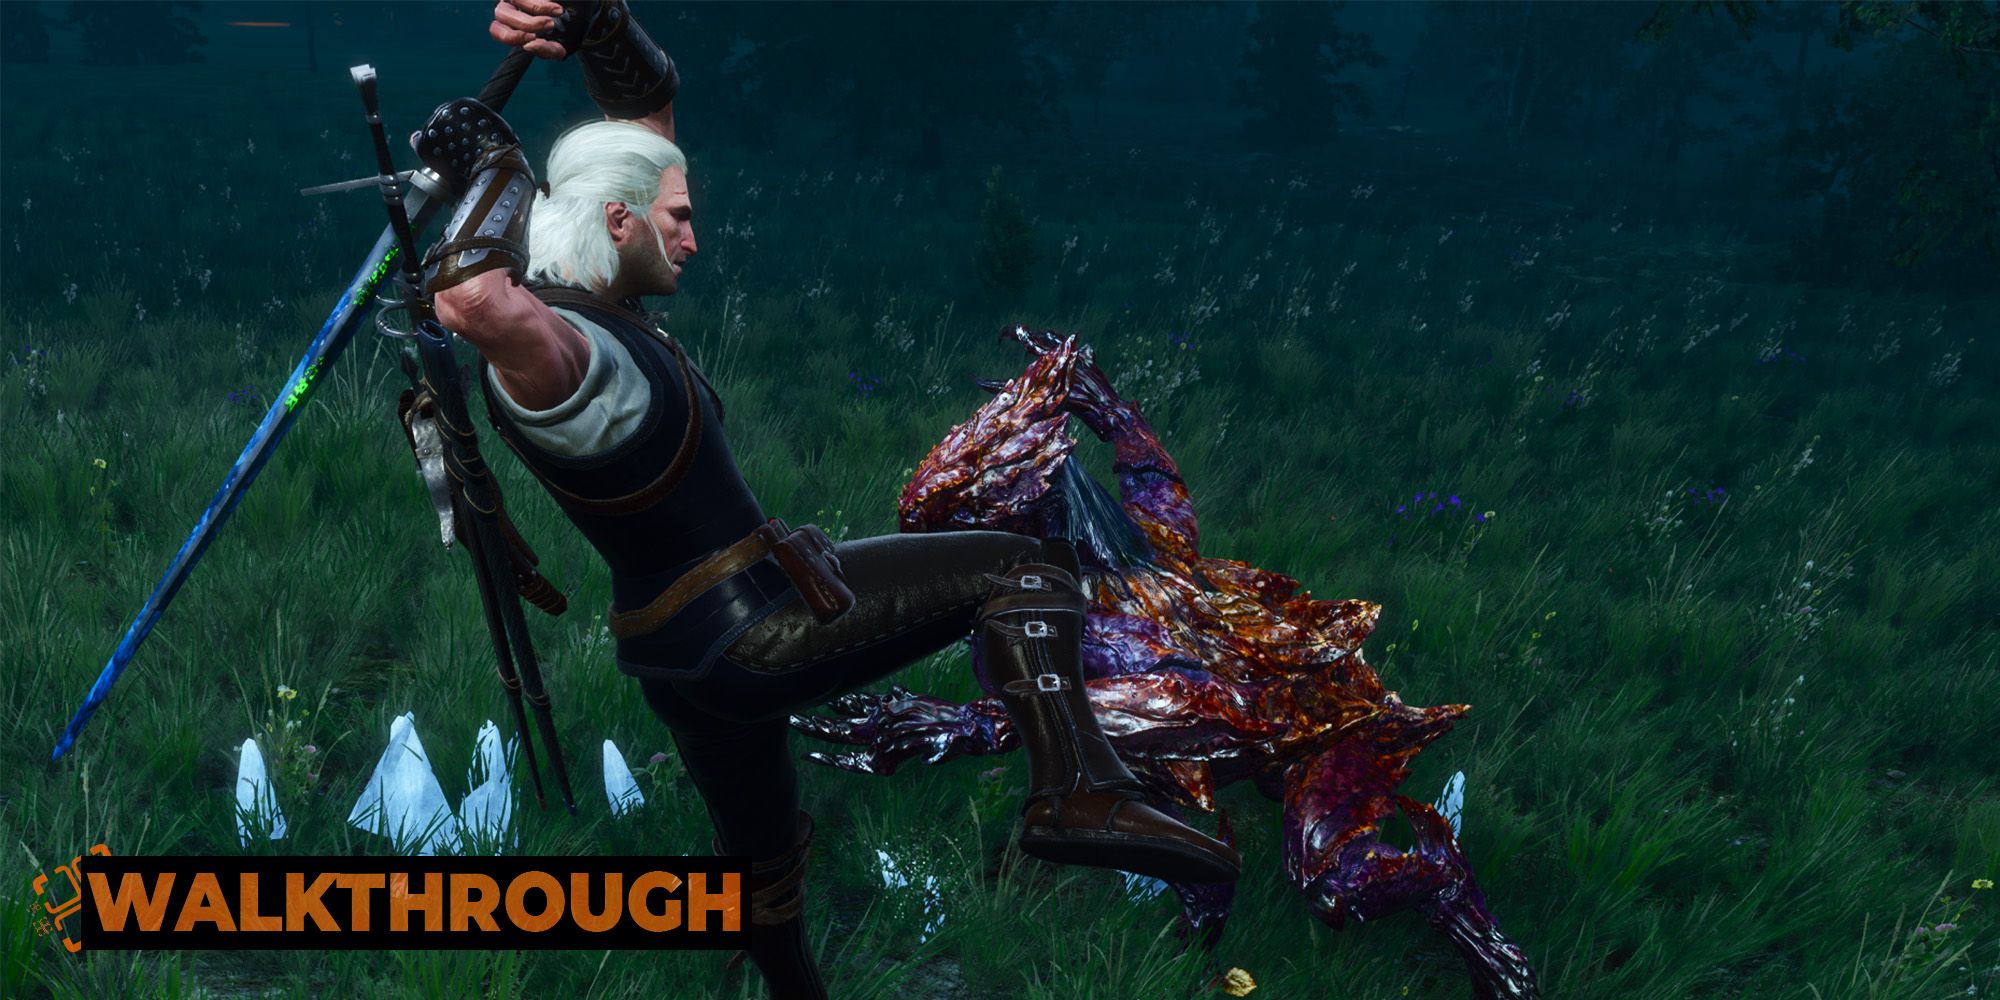 Geralt leaps into the air to strike a monster at night with his sword glowing with runes.